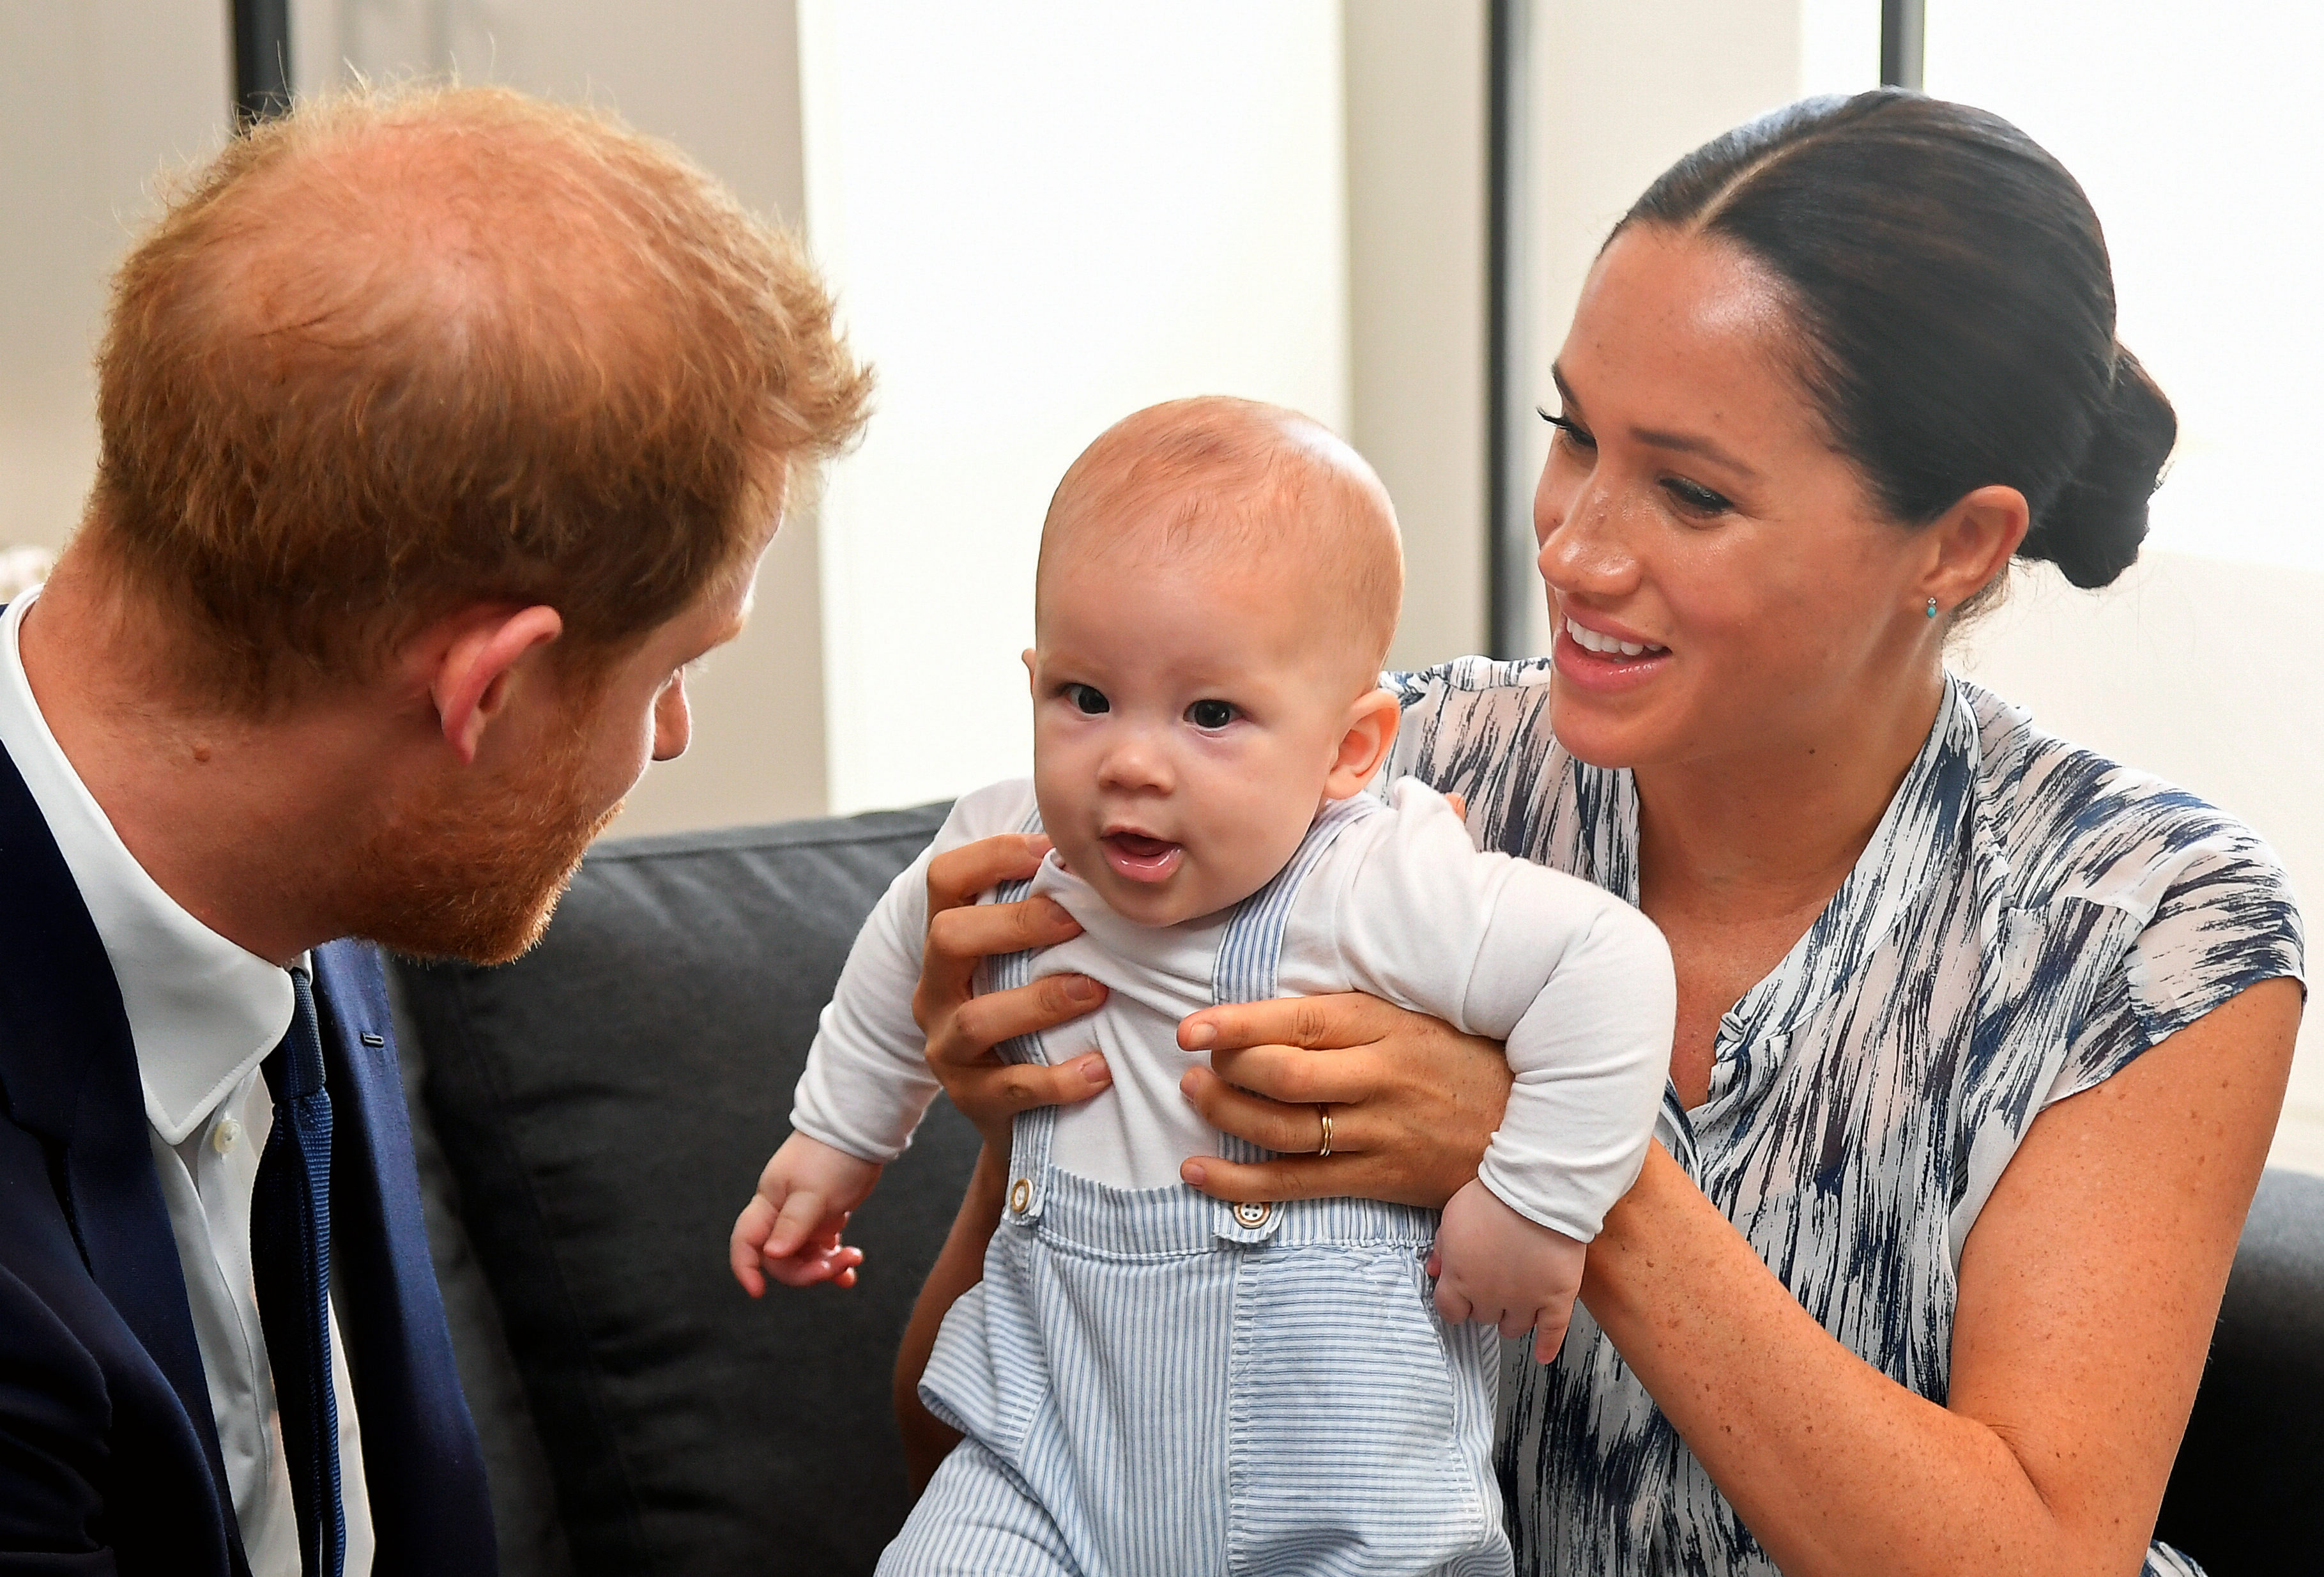 Prince Harry, Duke of Sussex and Meghan, Duchess of Sussex tend to their baby son Archie Mountbatten-Windsor at a meeting with Archbishop Desmond Tutu at the Desmond & Leah Tutu Legacy Foundation during their royal tour of South Africa on September 25, 2019 in Cape Town, South Africa. (Photo by Toby Melville - Pool/Getty Images)